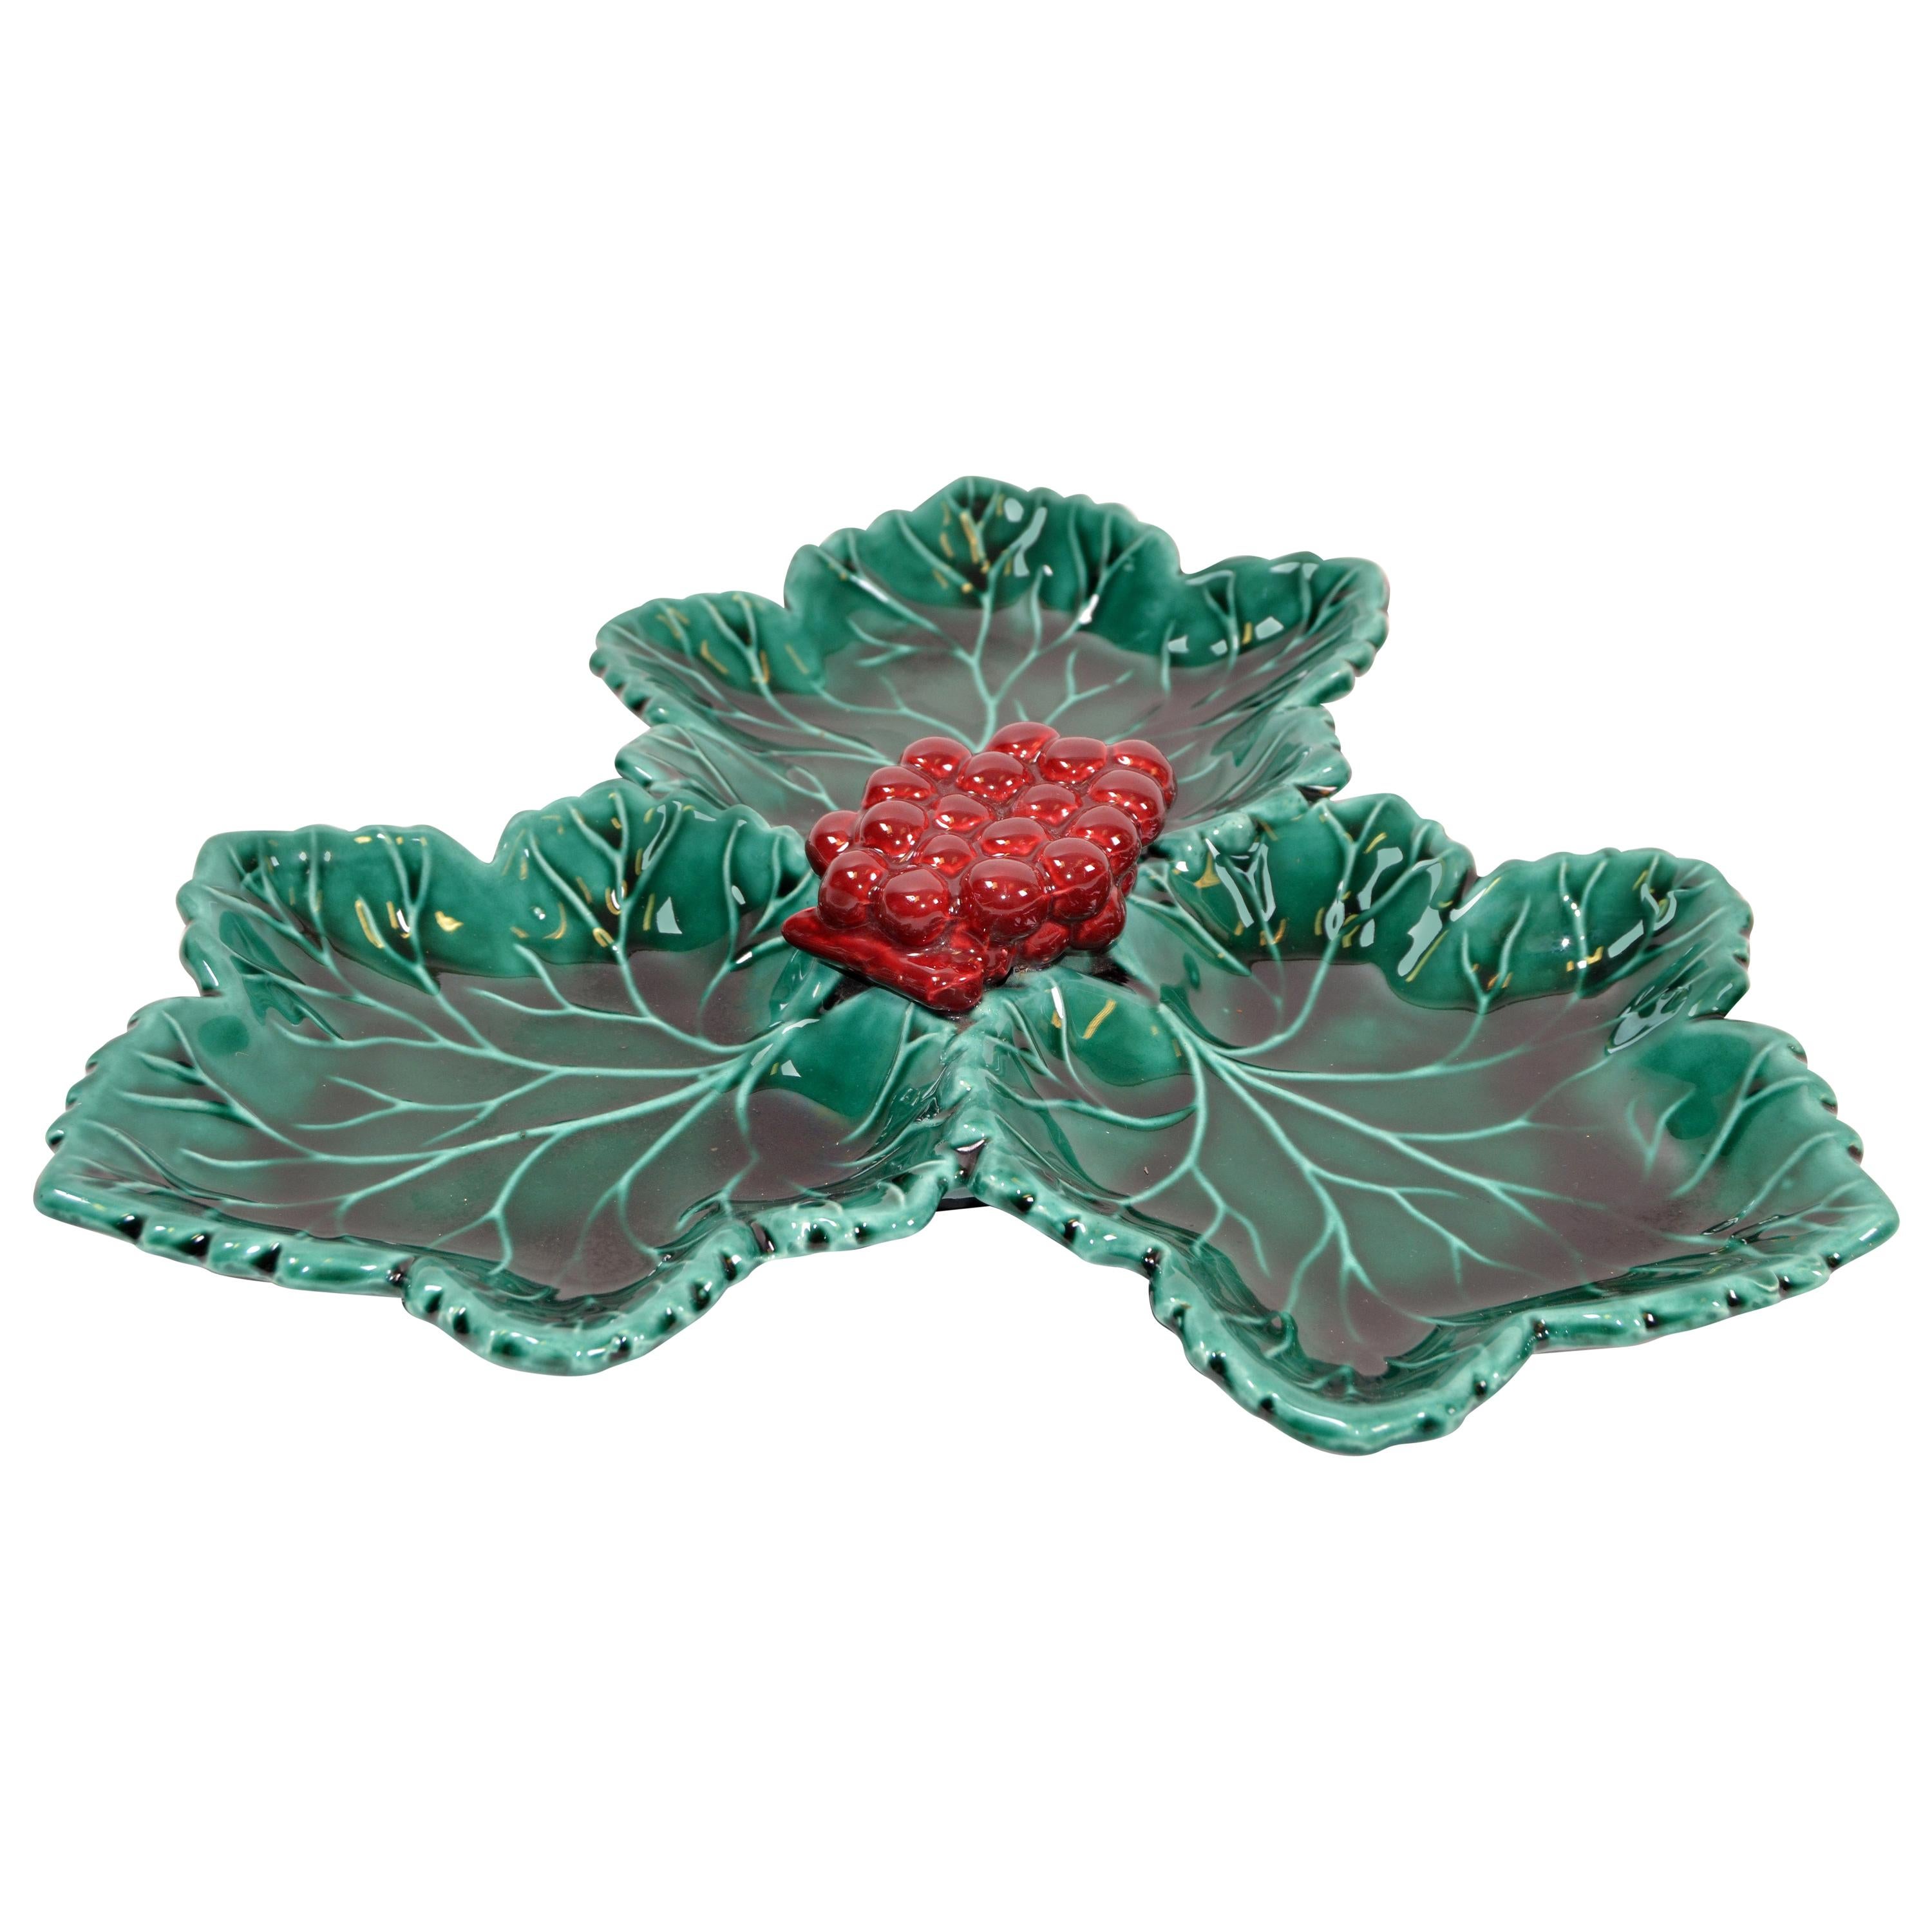 Vallauris French Glazed Grapes & Vine Leaves Ceramic Serving Plate Green and Red